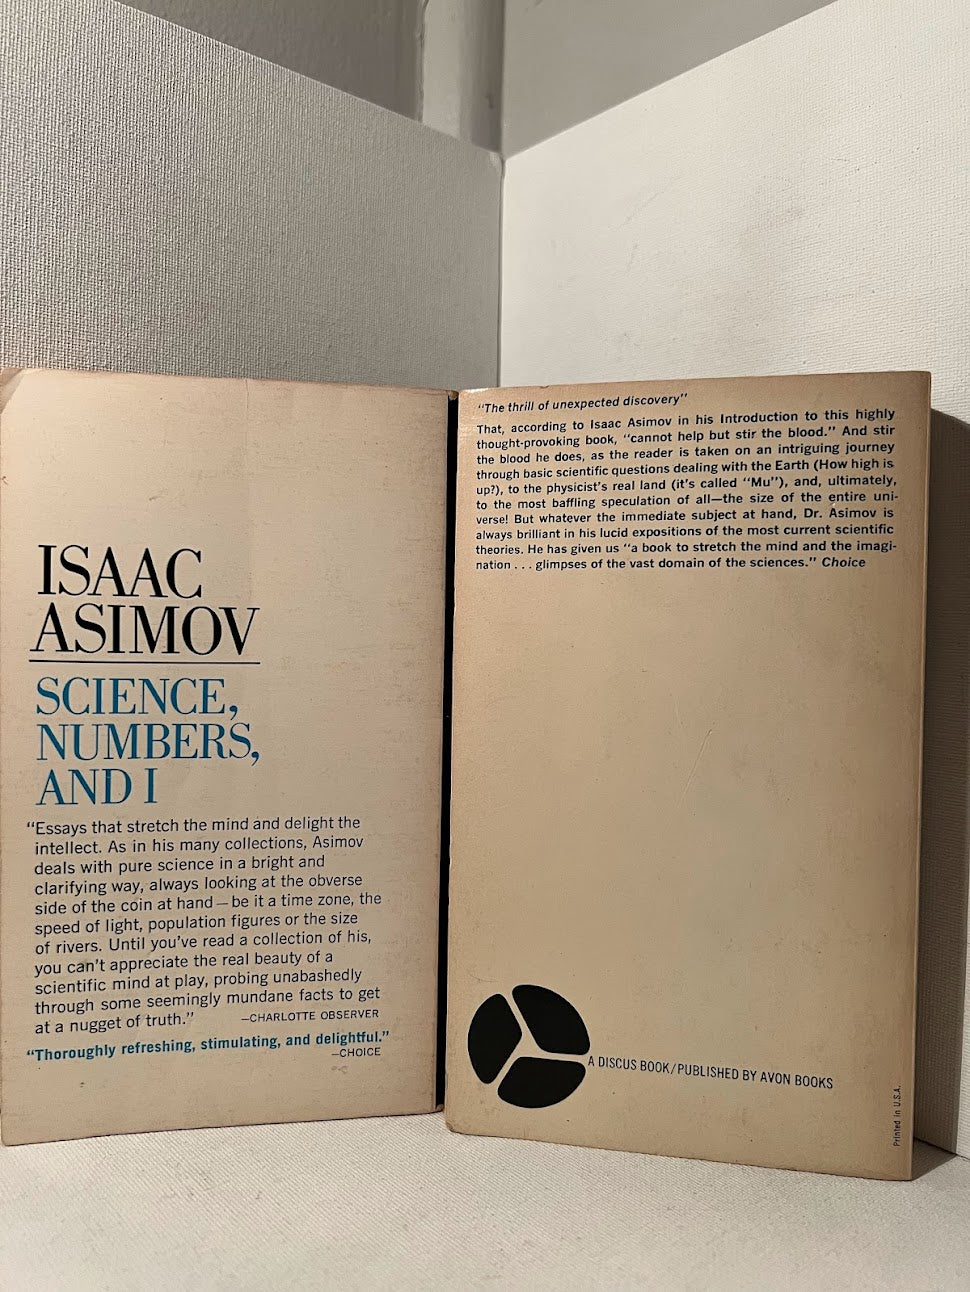 Science, Numbers and I & From Earth to Heaven by Isaac Asimov